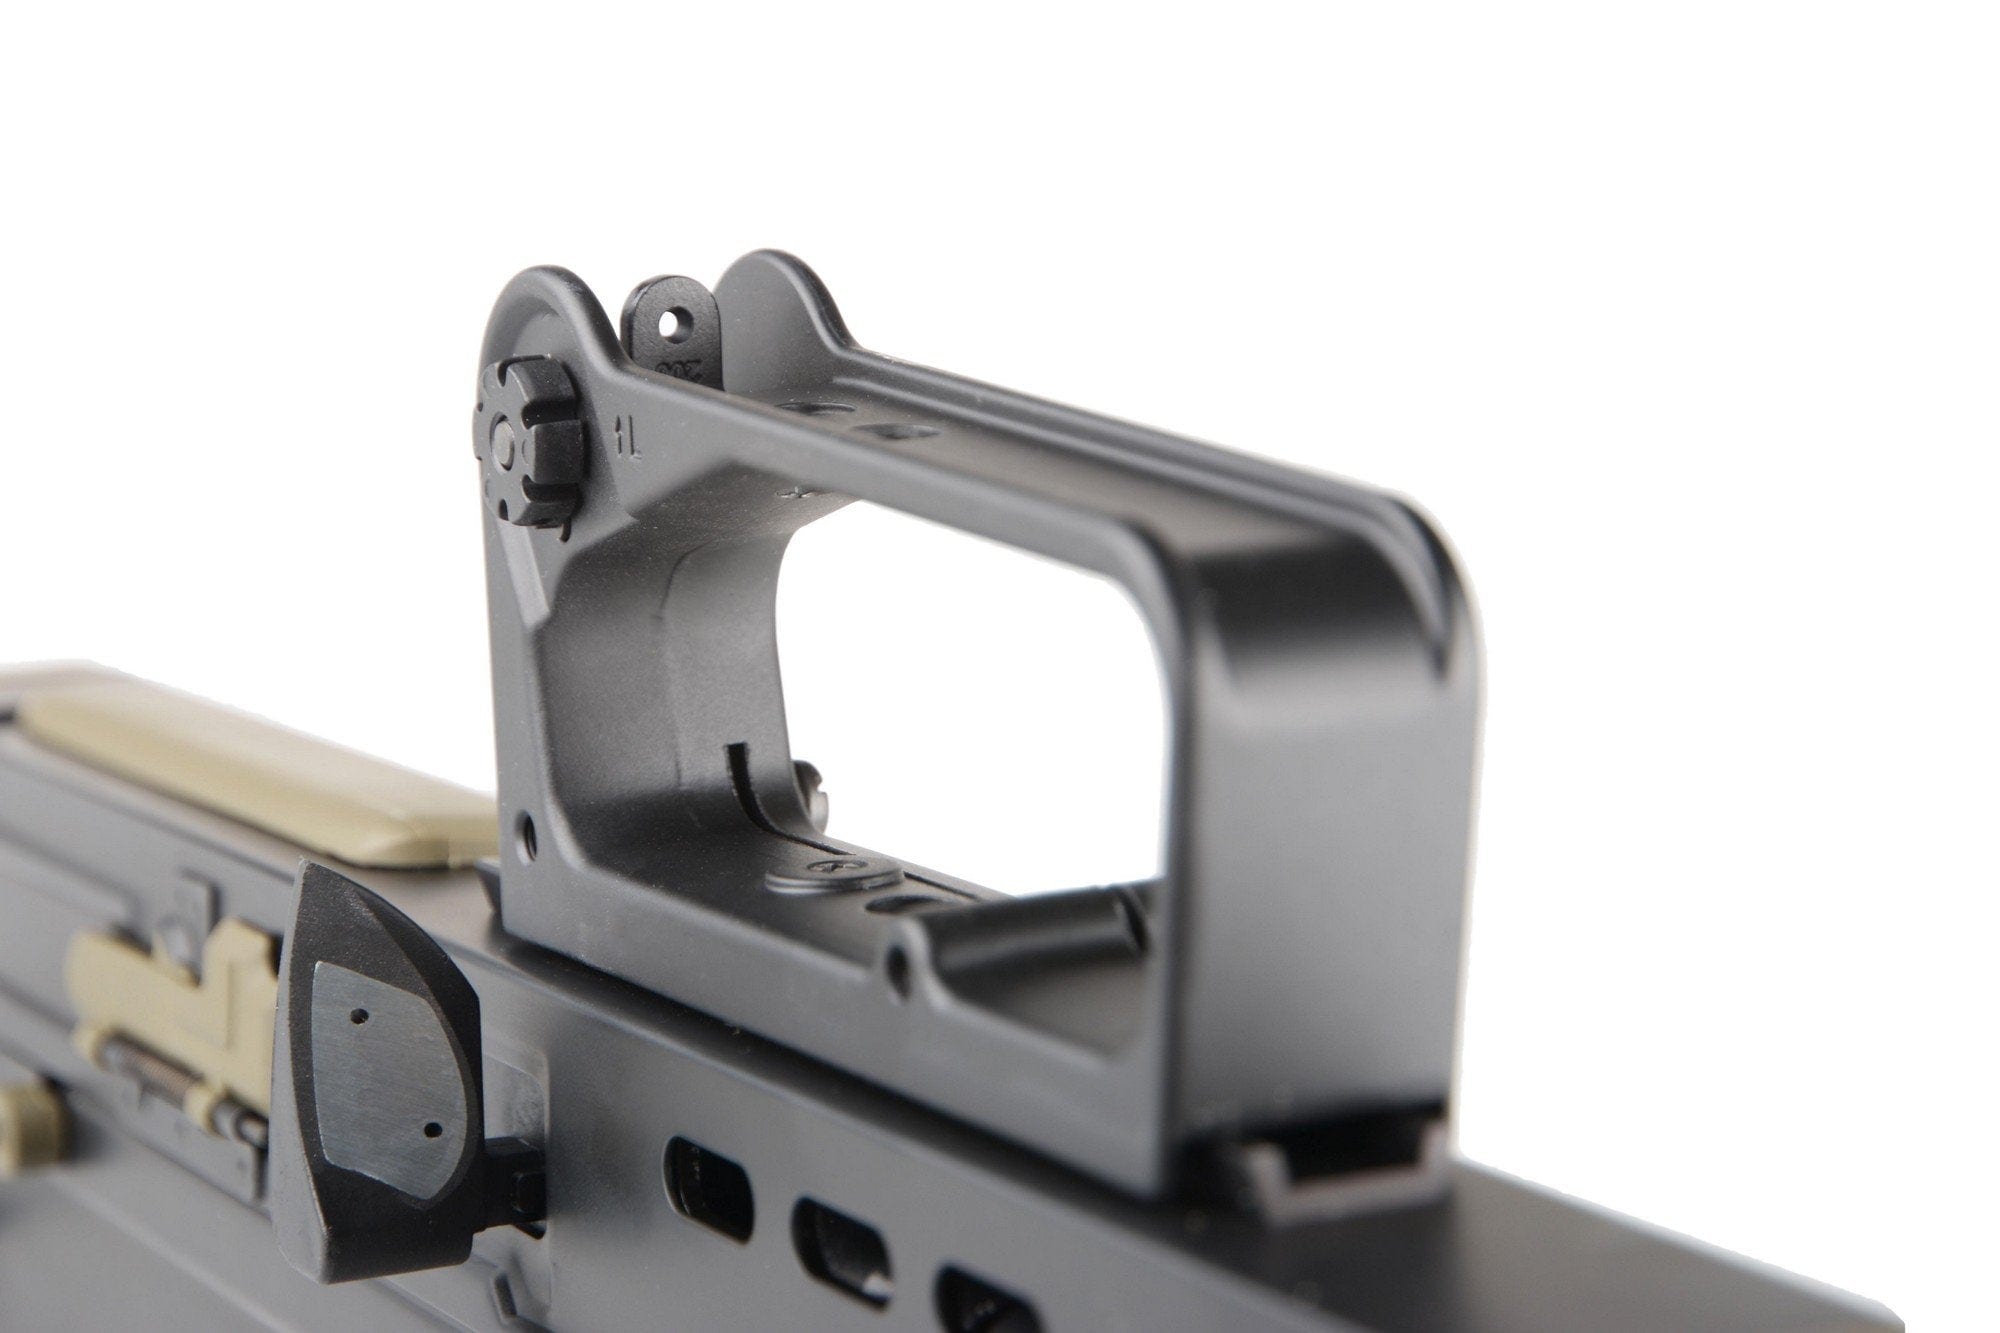 L85A2 handle with integrated optical sight 